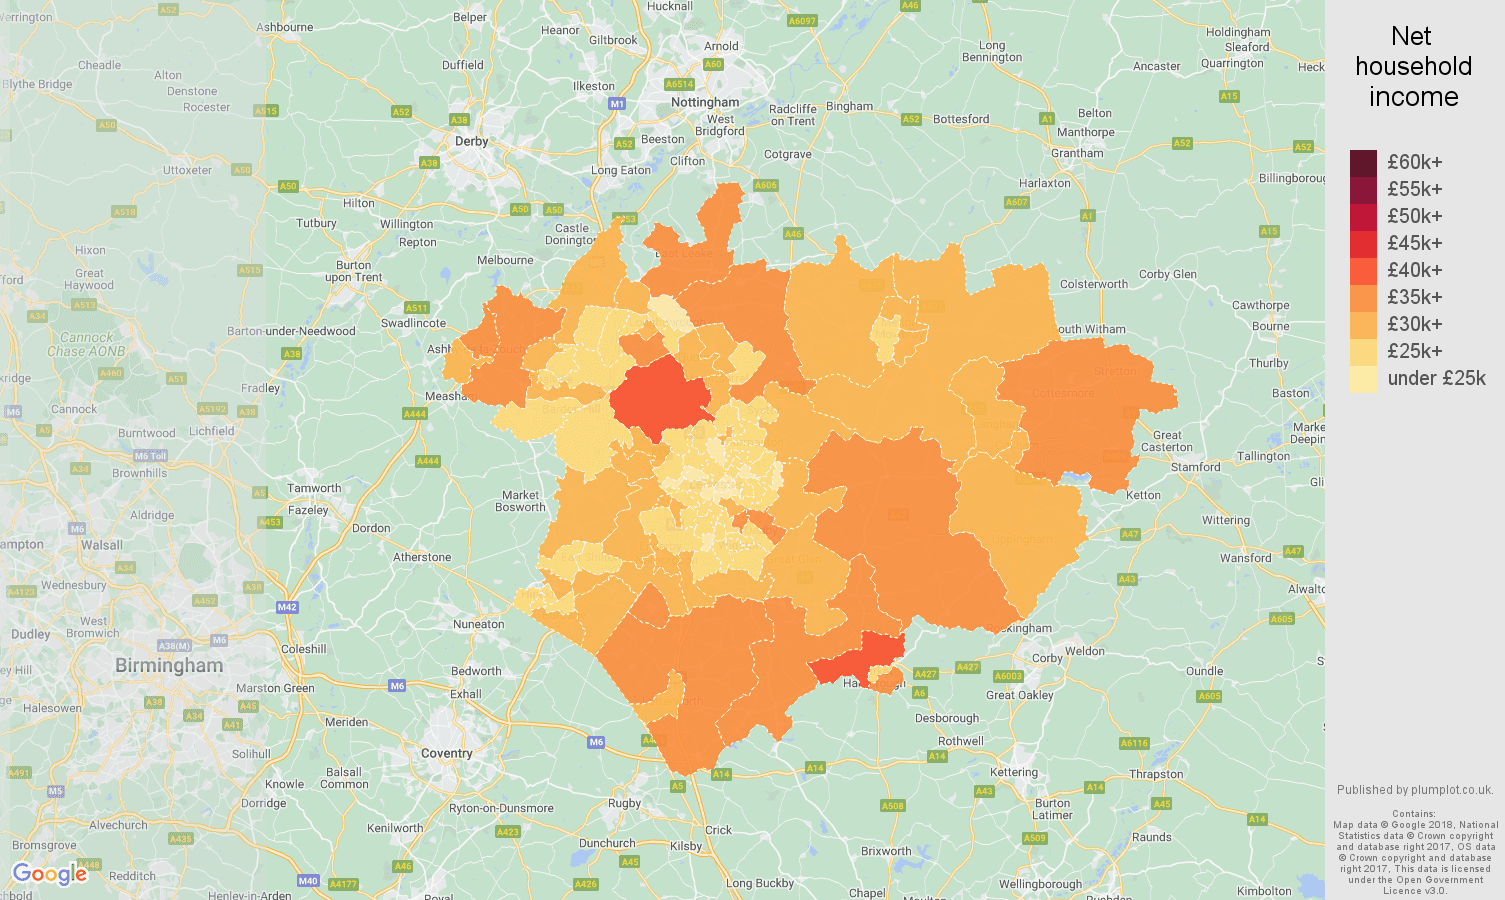 Leicester net household income map